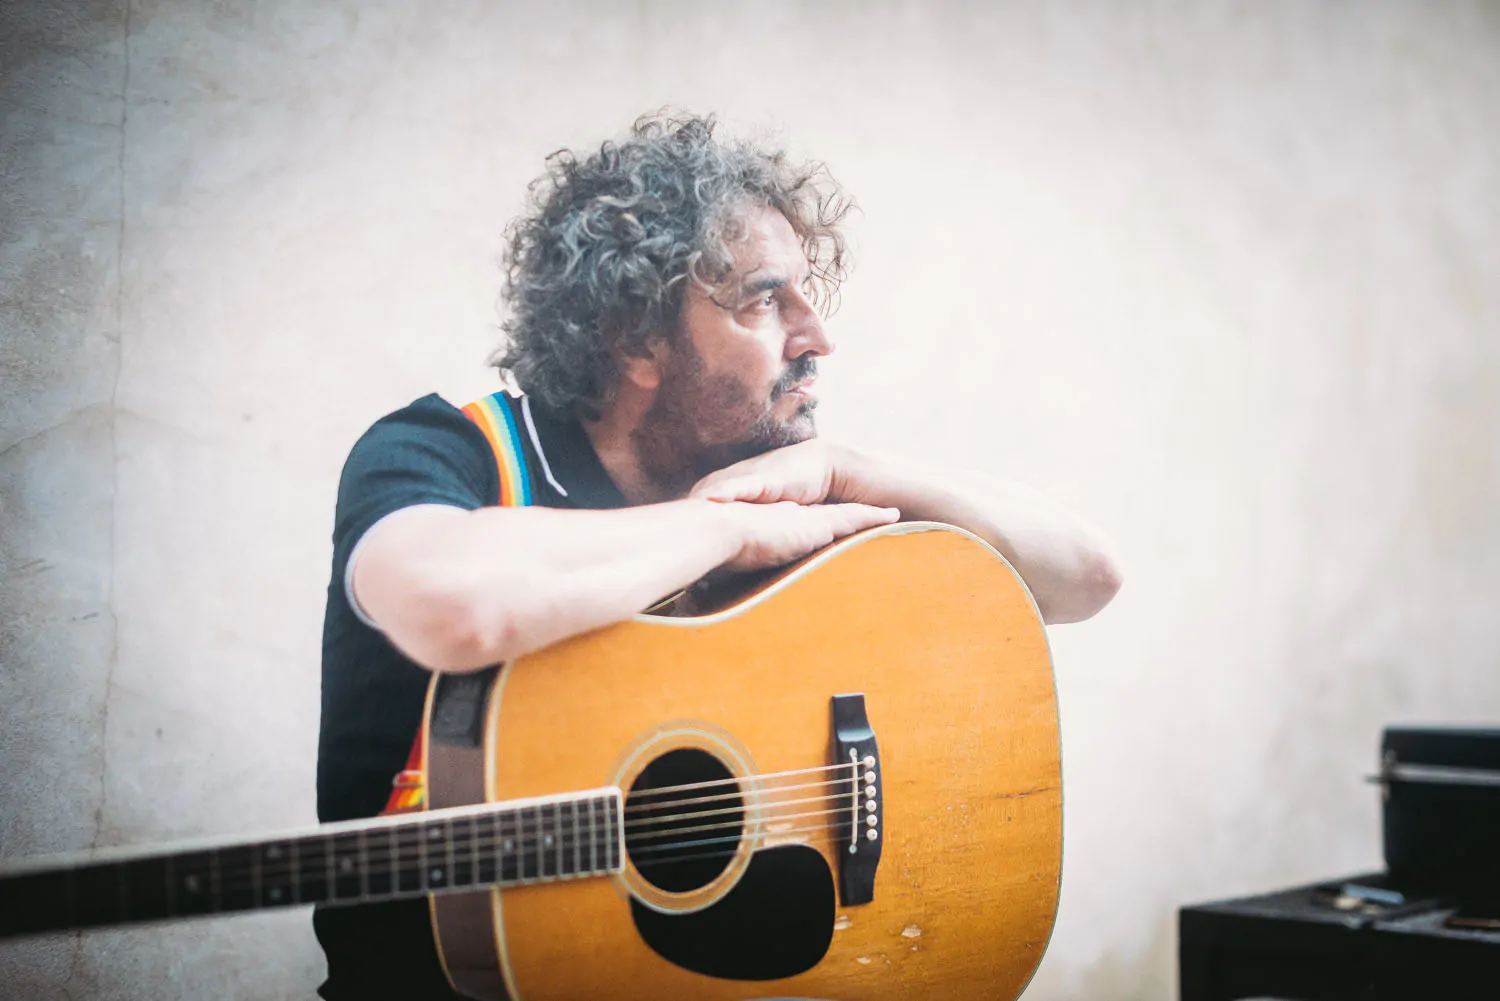 PREMIERE: Ian Prowse releases ‘Home’ video in support of CALM